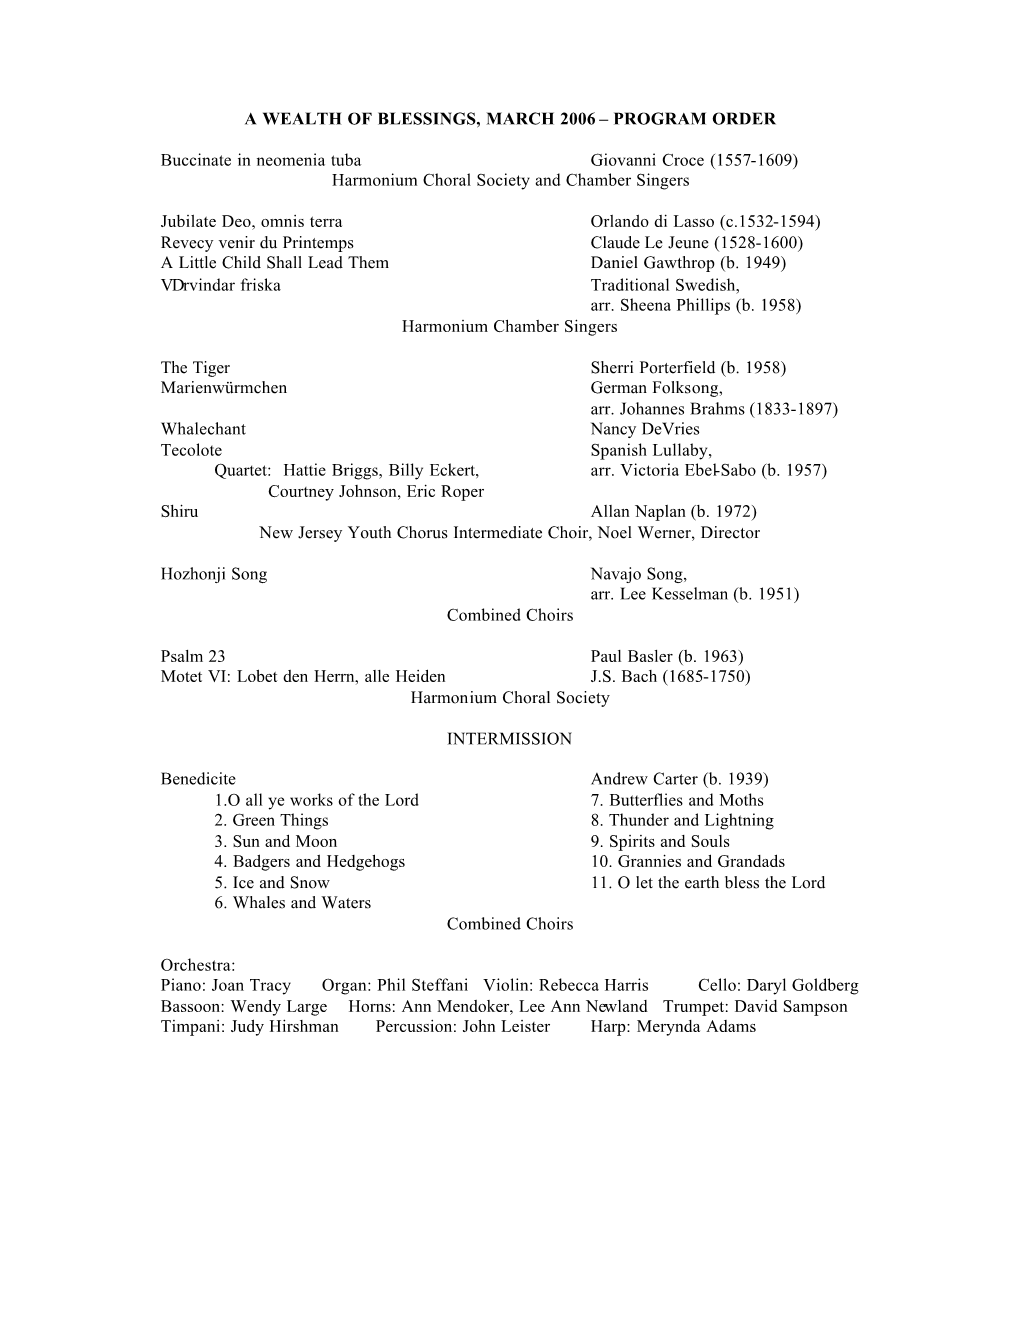 A Wealth of Blessings, March 2006 – Program Order